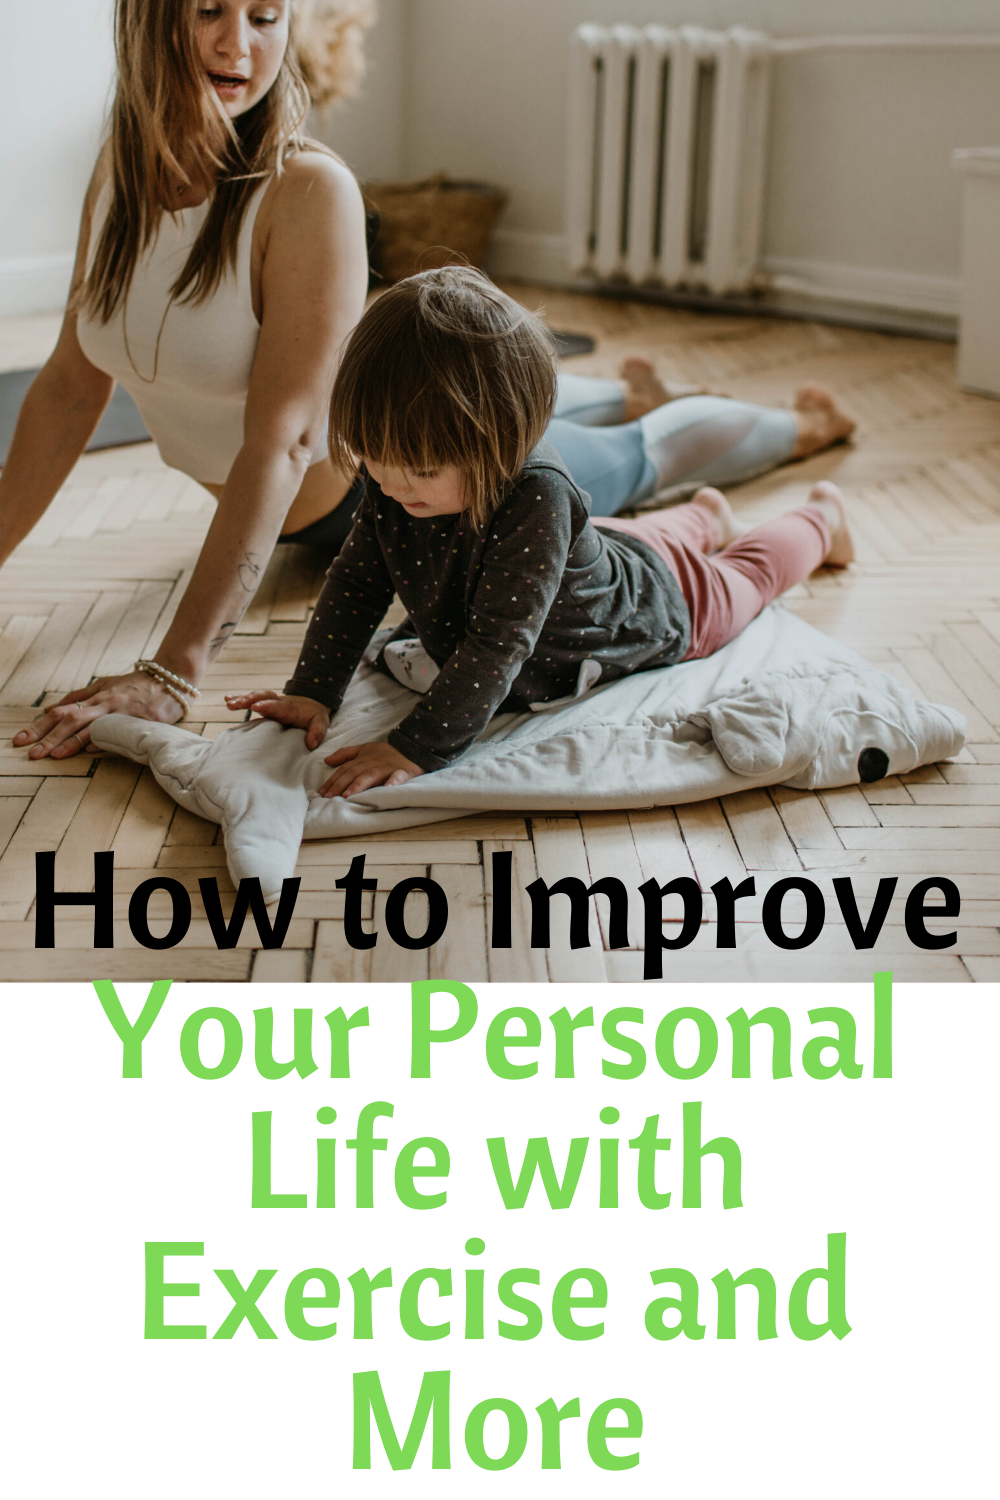 How to Improve Your Personal Life with Exercise and More